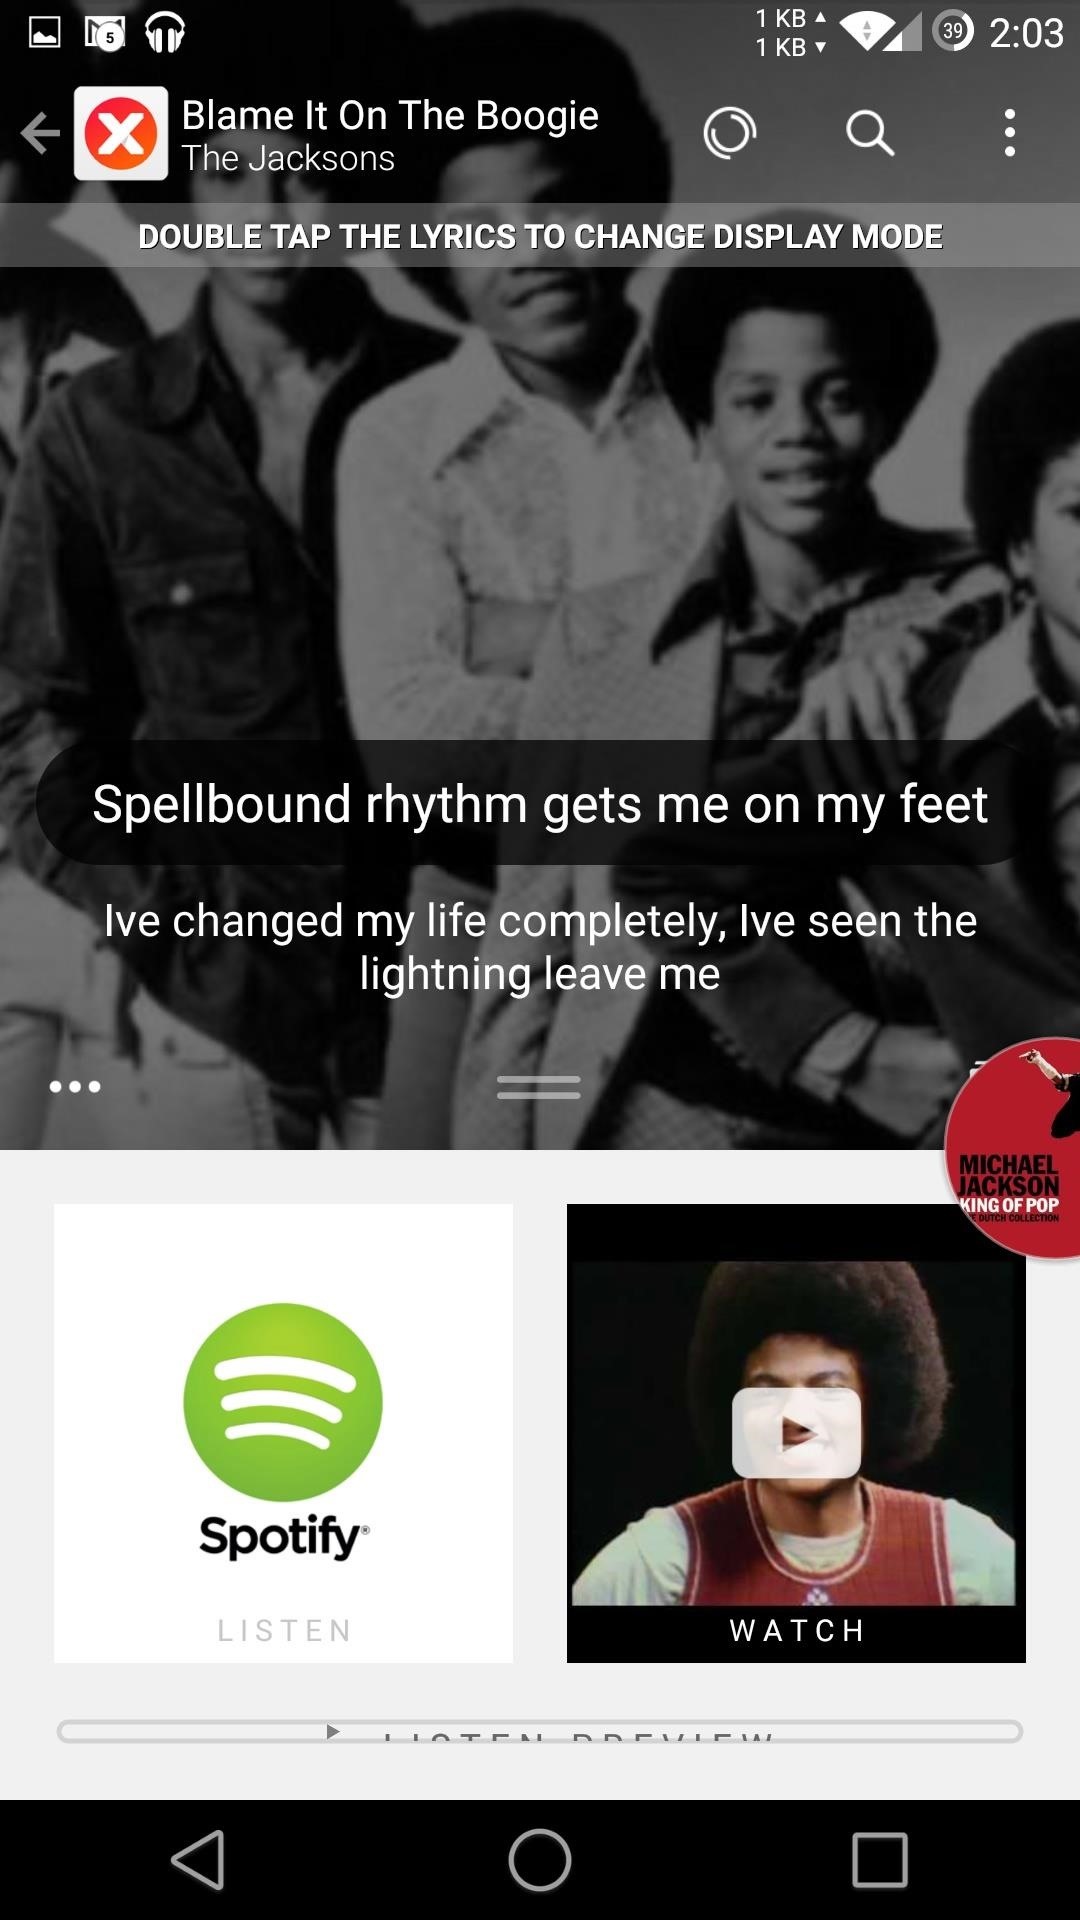 How to Get Karaoke-Style Floating Lyrics for Any Song on Your HTC One